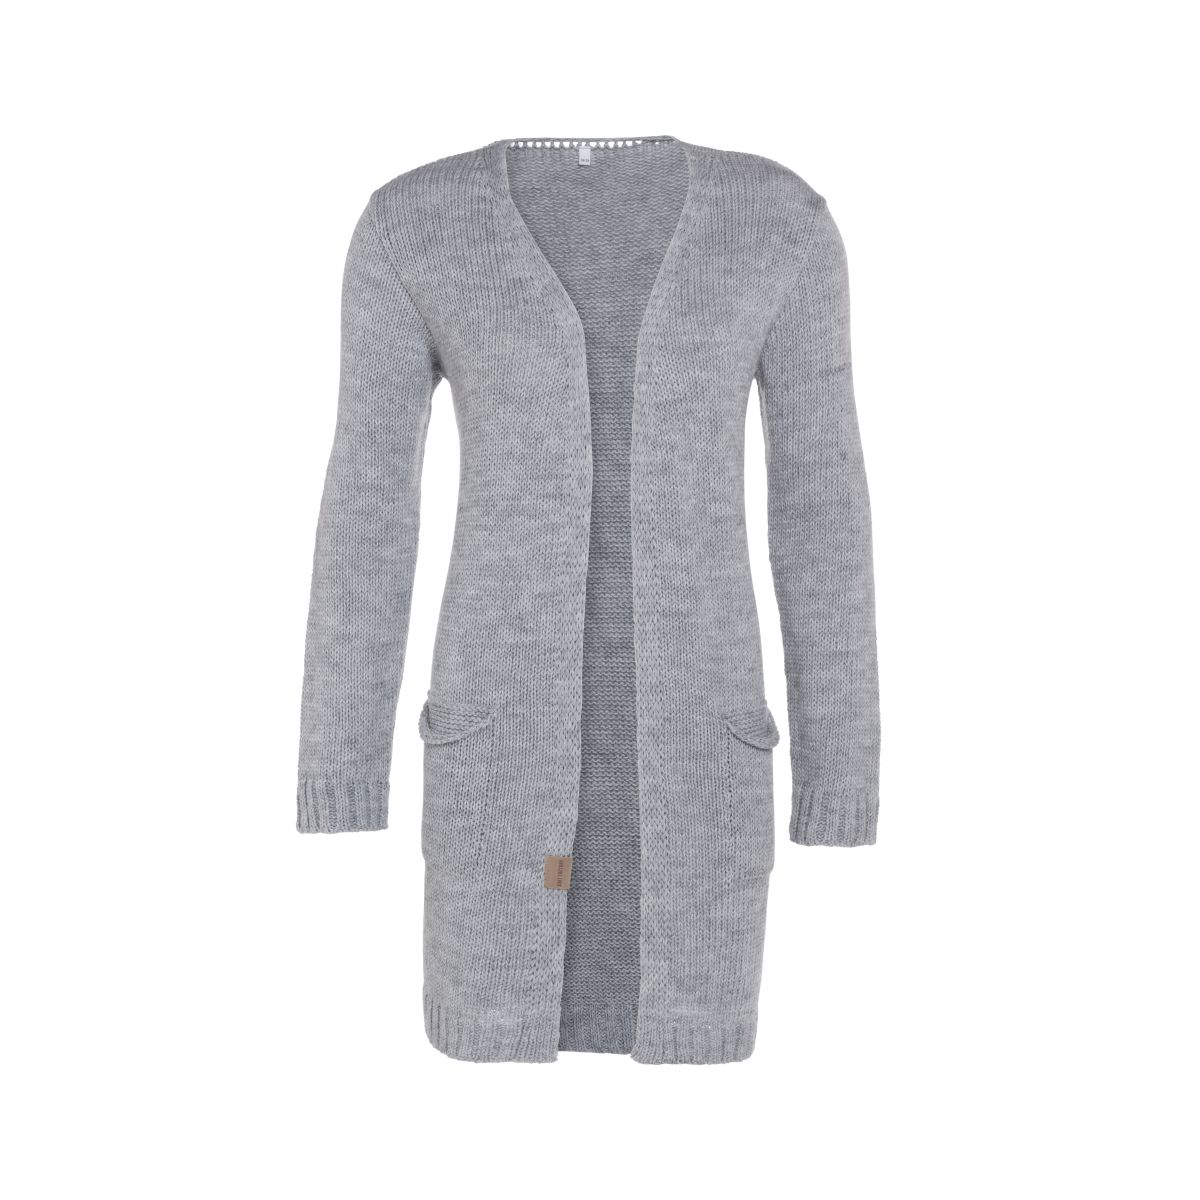 ruby knitted cardigan light grey 4042 with side pockets